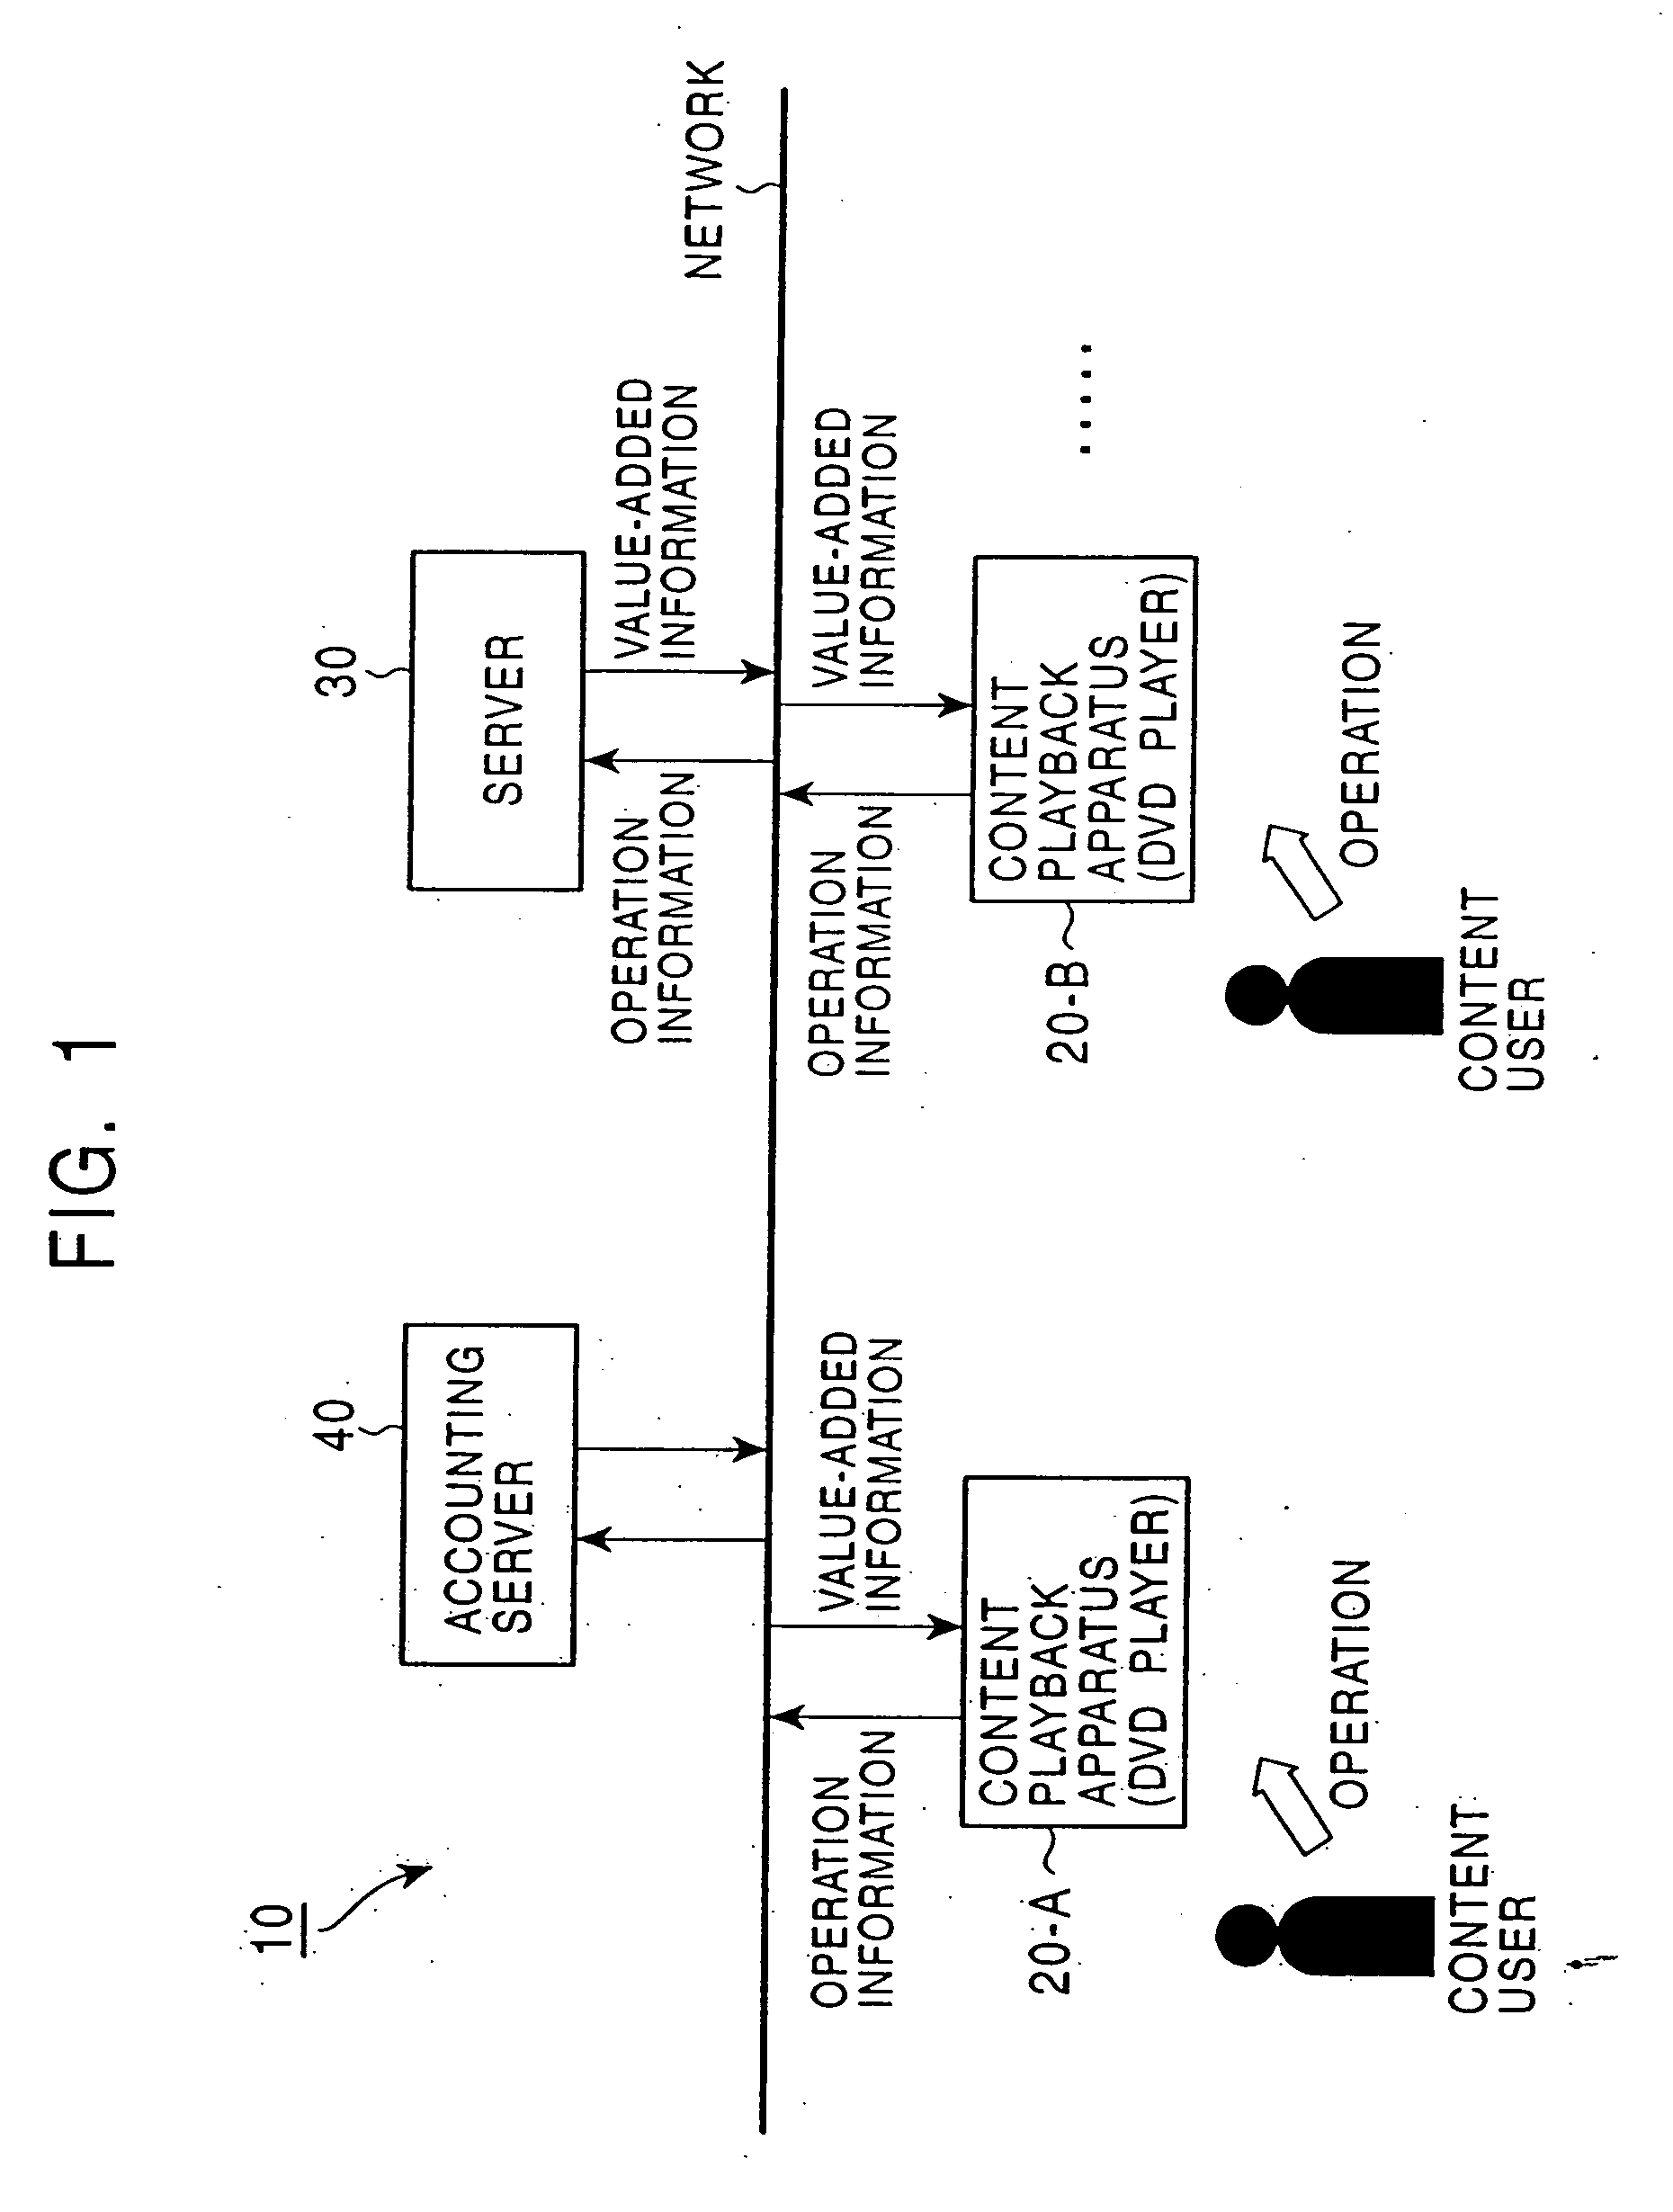 Content processing apparatus and content processing method for digest information based on input of content user